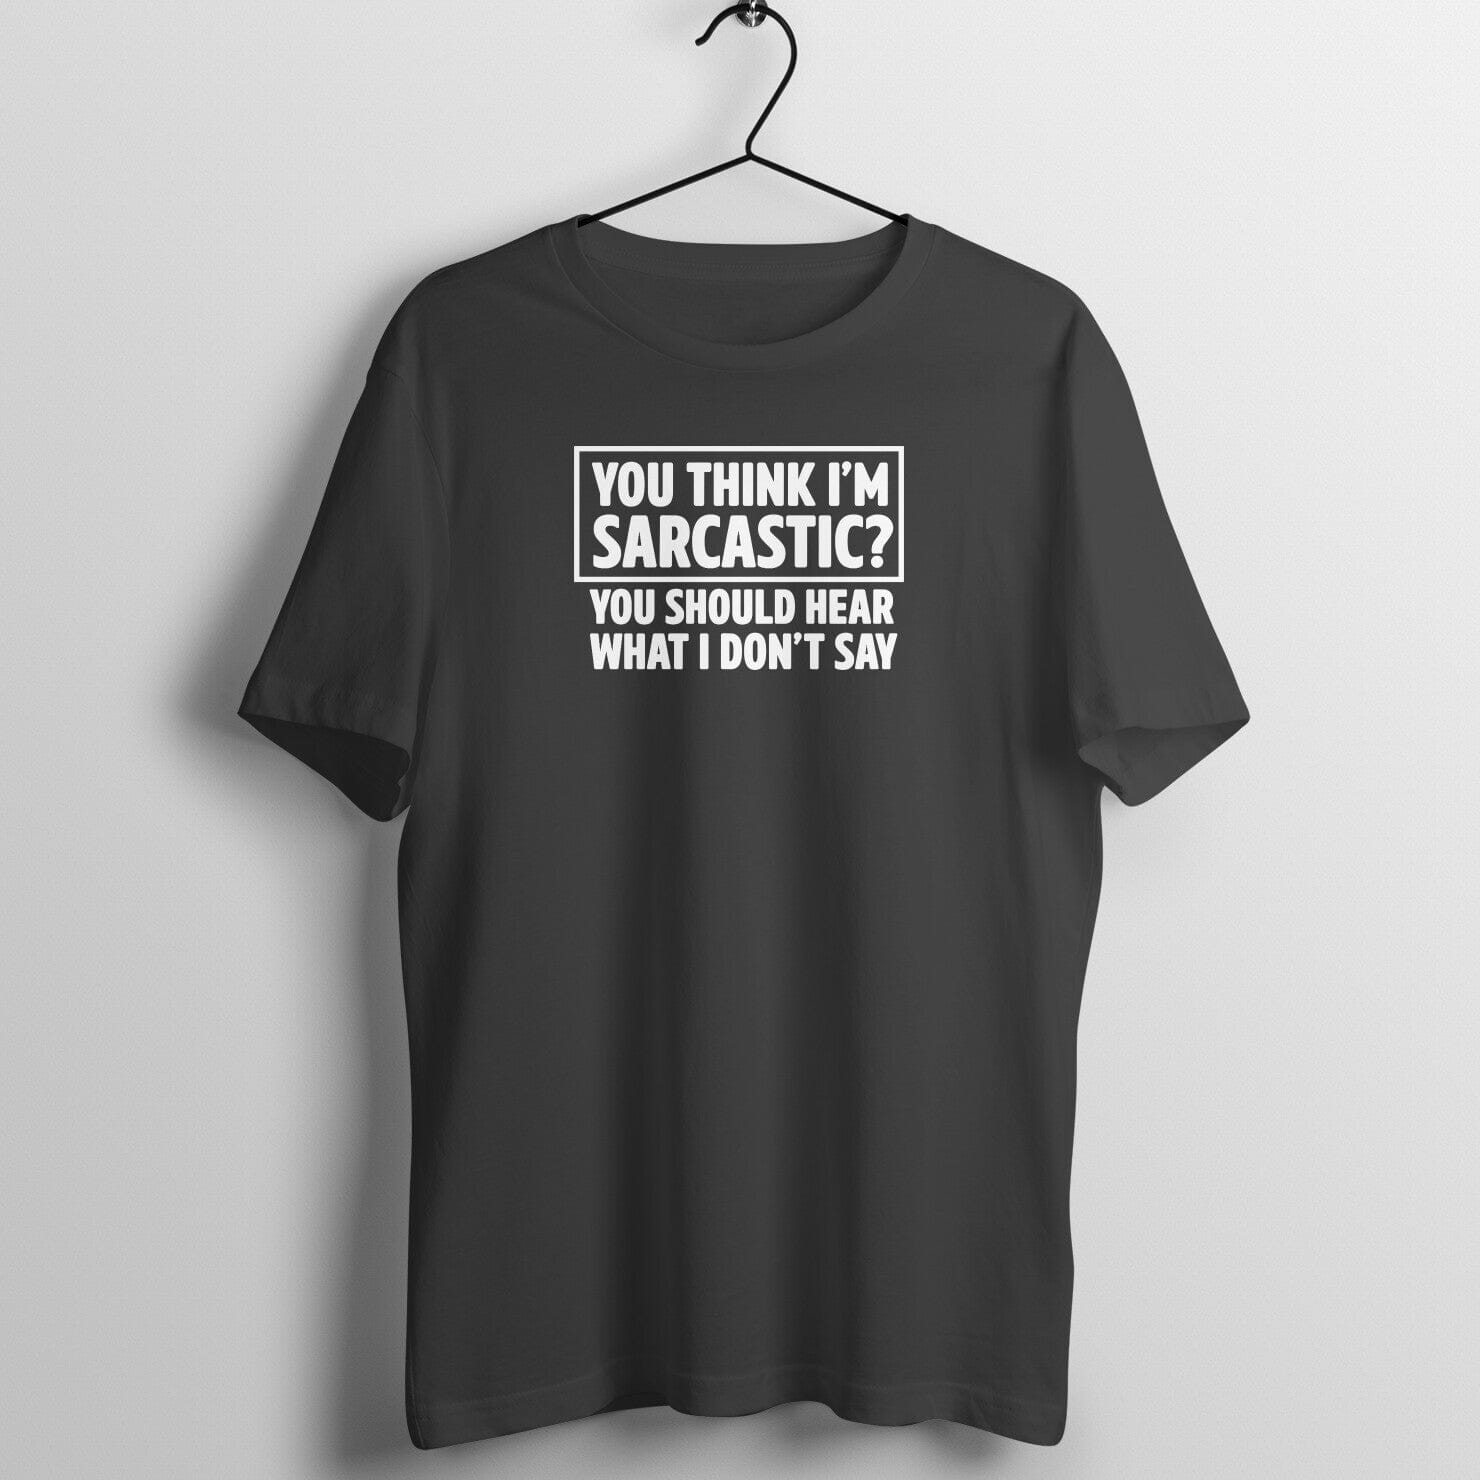 You Think I'm Sarcastic Funny Black T Shirt for Men and Women Printrove Black S 